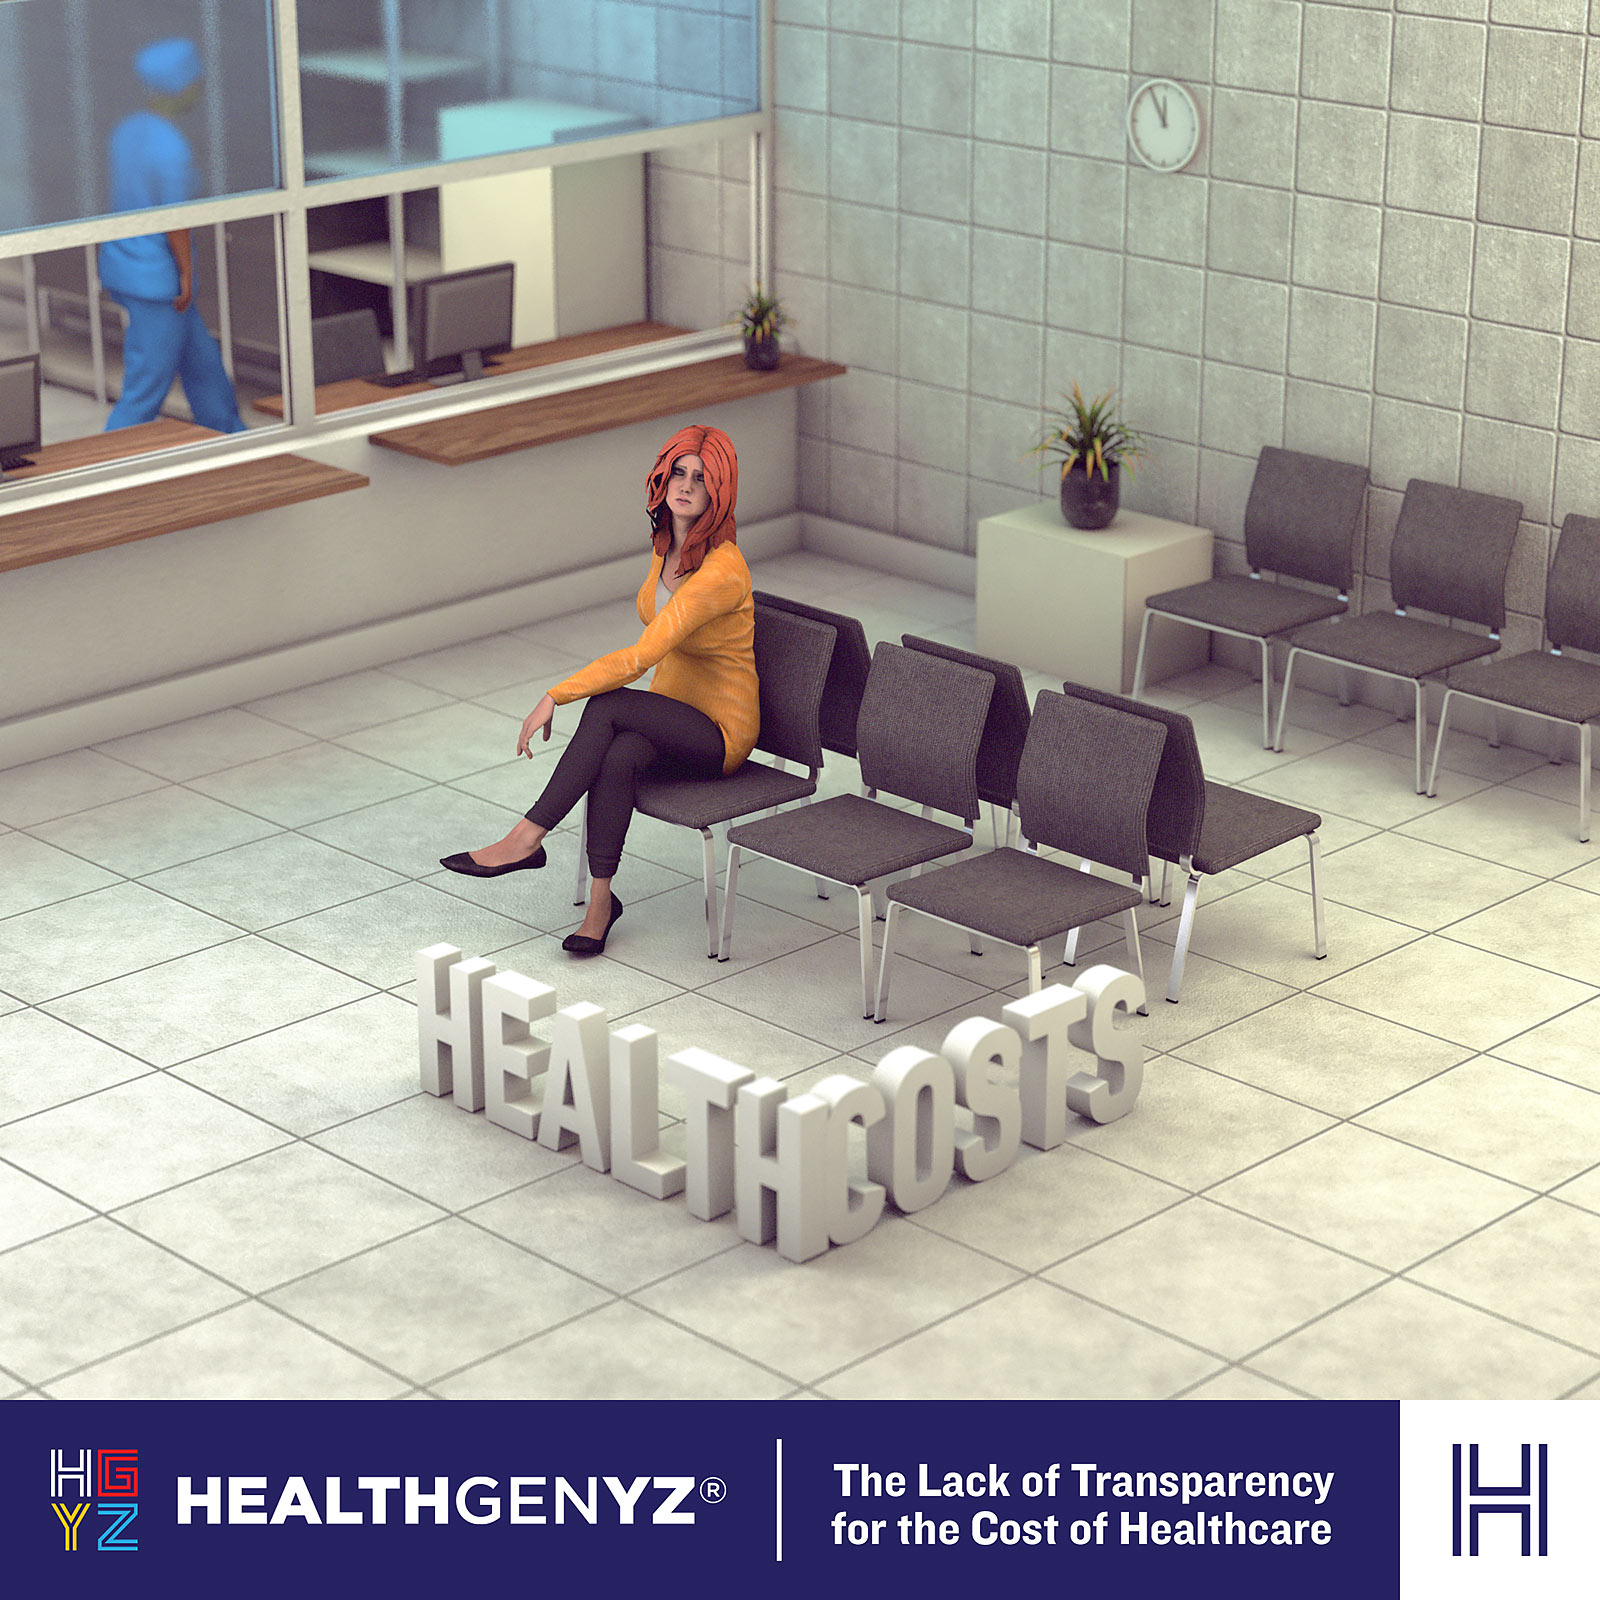 HealthGenYZ category content; a 3D model of a person in a yellow blouse, with a white shirt underneath, and black leggings, sitting on a chair in a pharmacy waiting room, with tiled floors, and a pharmacist in the background, with 3D extruded text on the floor that say, "Health Costs".